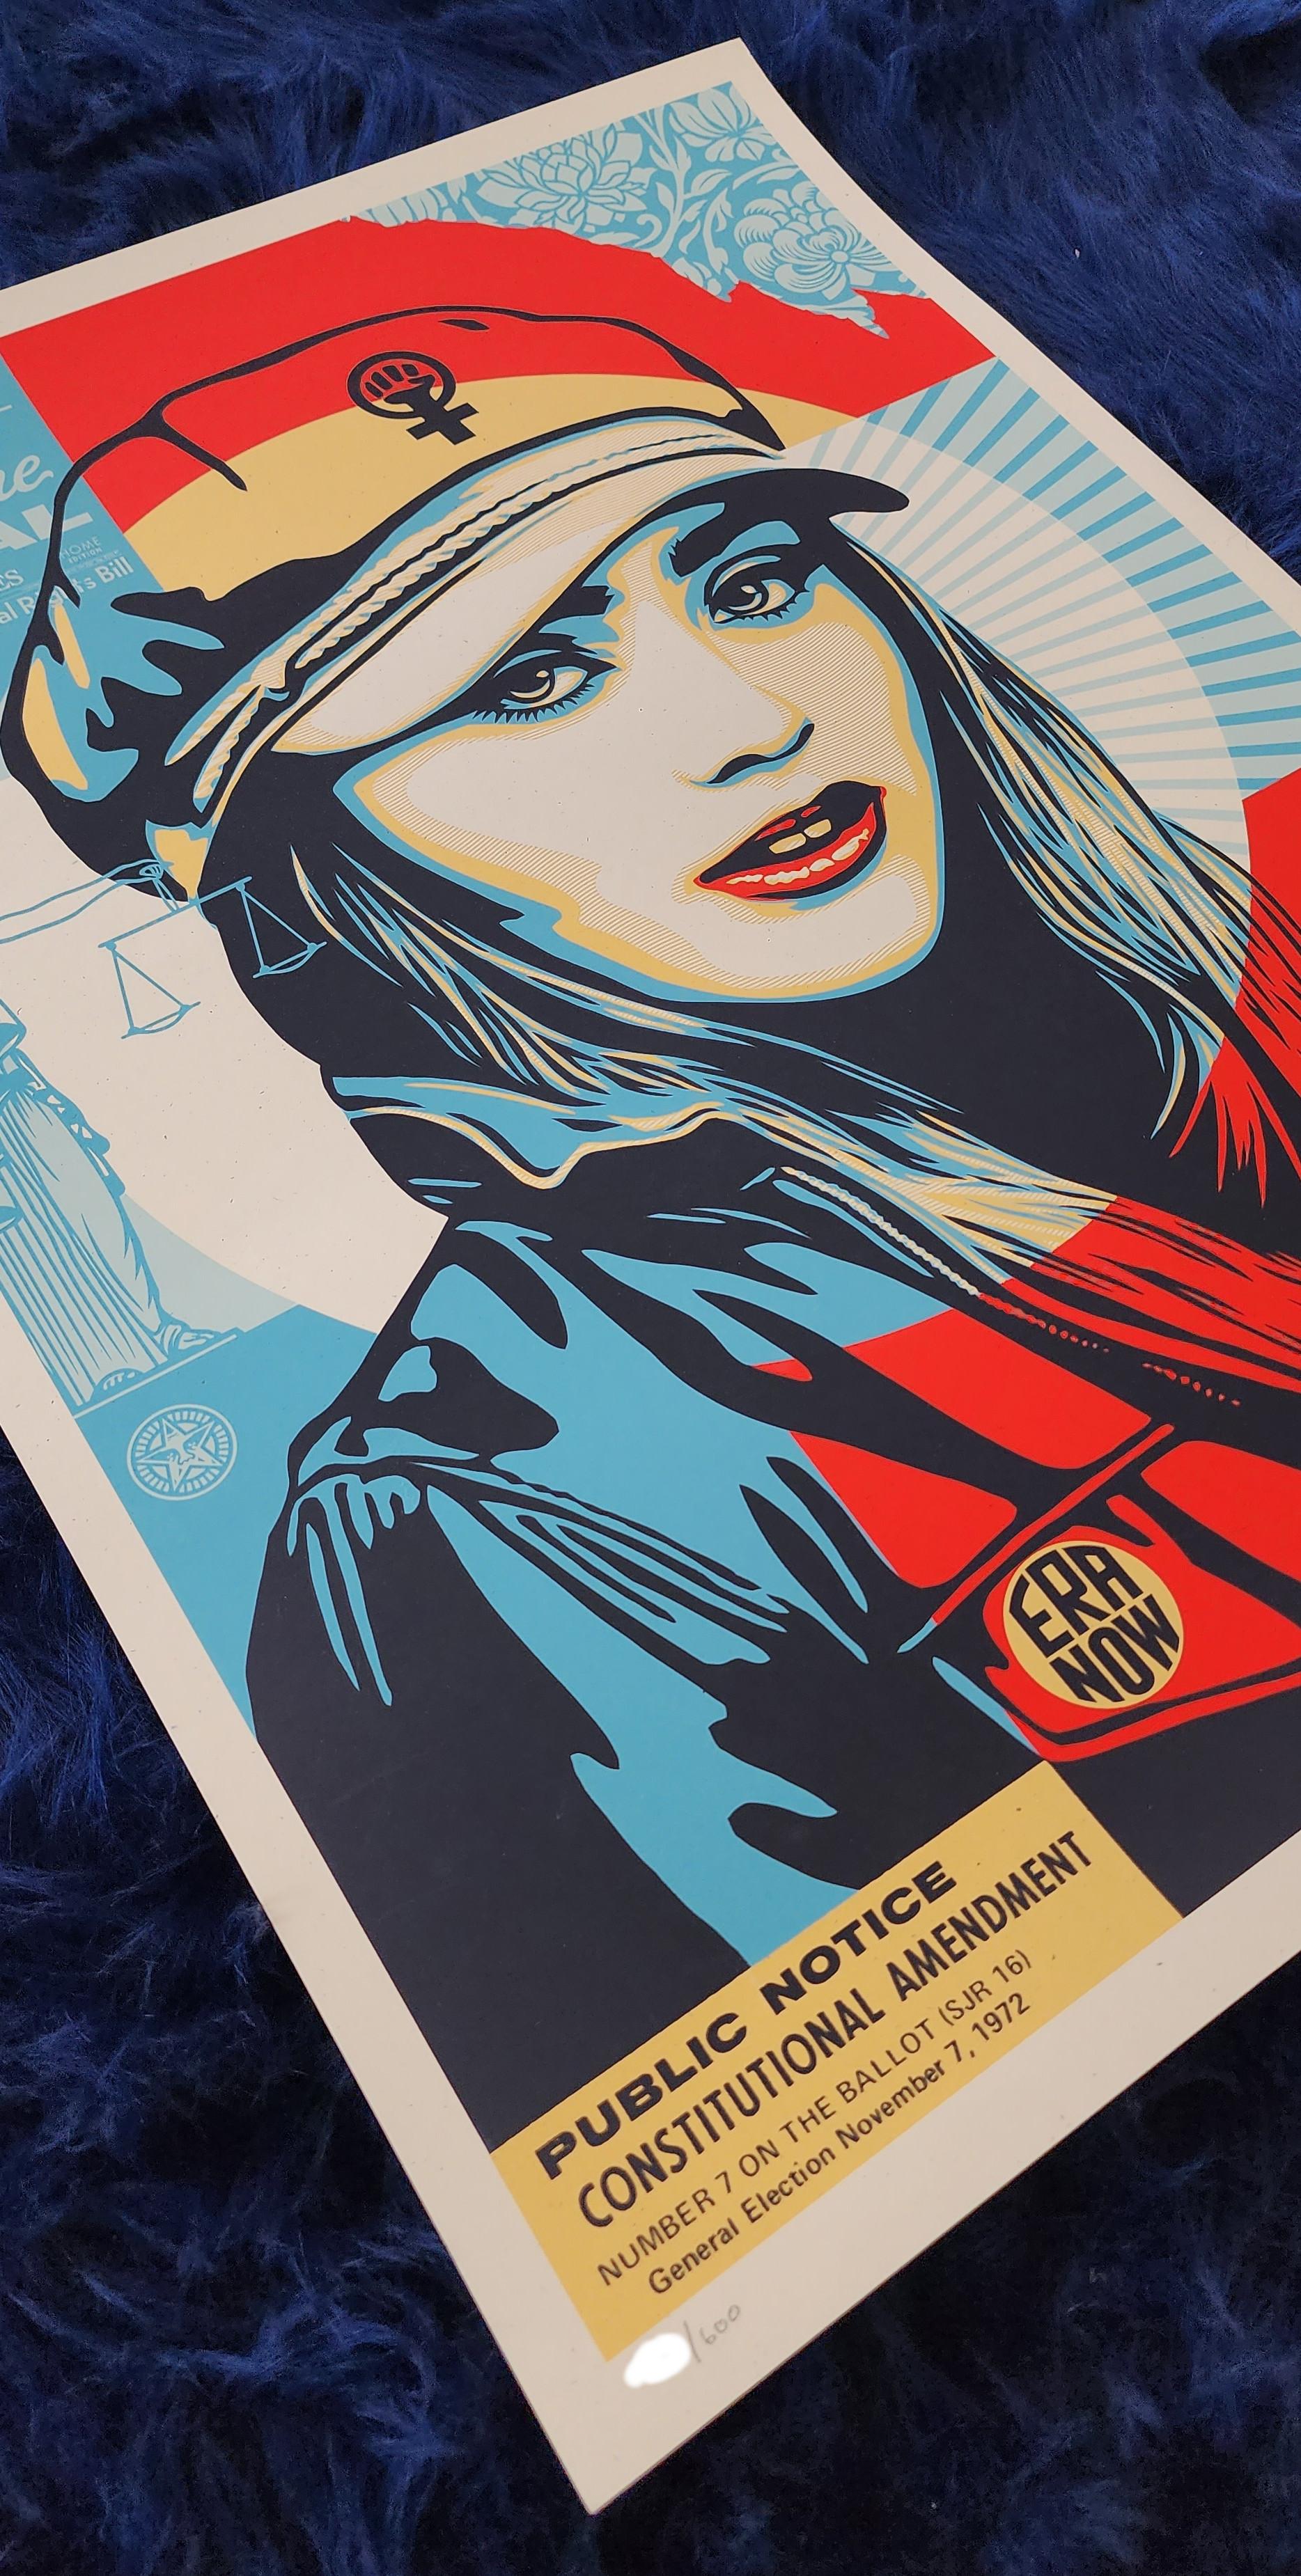 Shepard Fairey
The Future Is Equal
Screen print on thick cream Speckletone paper
Year: 2022
Size: 24 x 18 inches
Edition: 600
Signed, dated and numbered by hand
COA provided
Ref.: 924802-1594


Frank Shepard Fairey (born February 15, 1970) is an